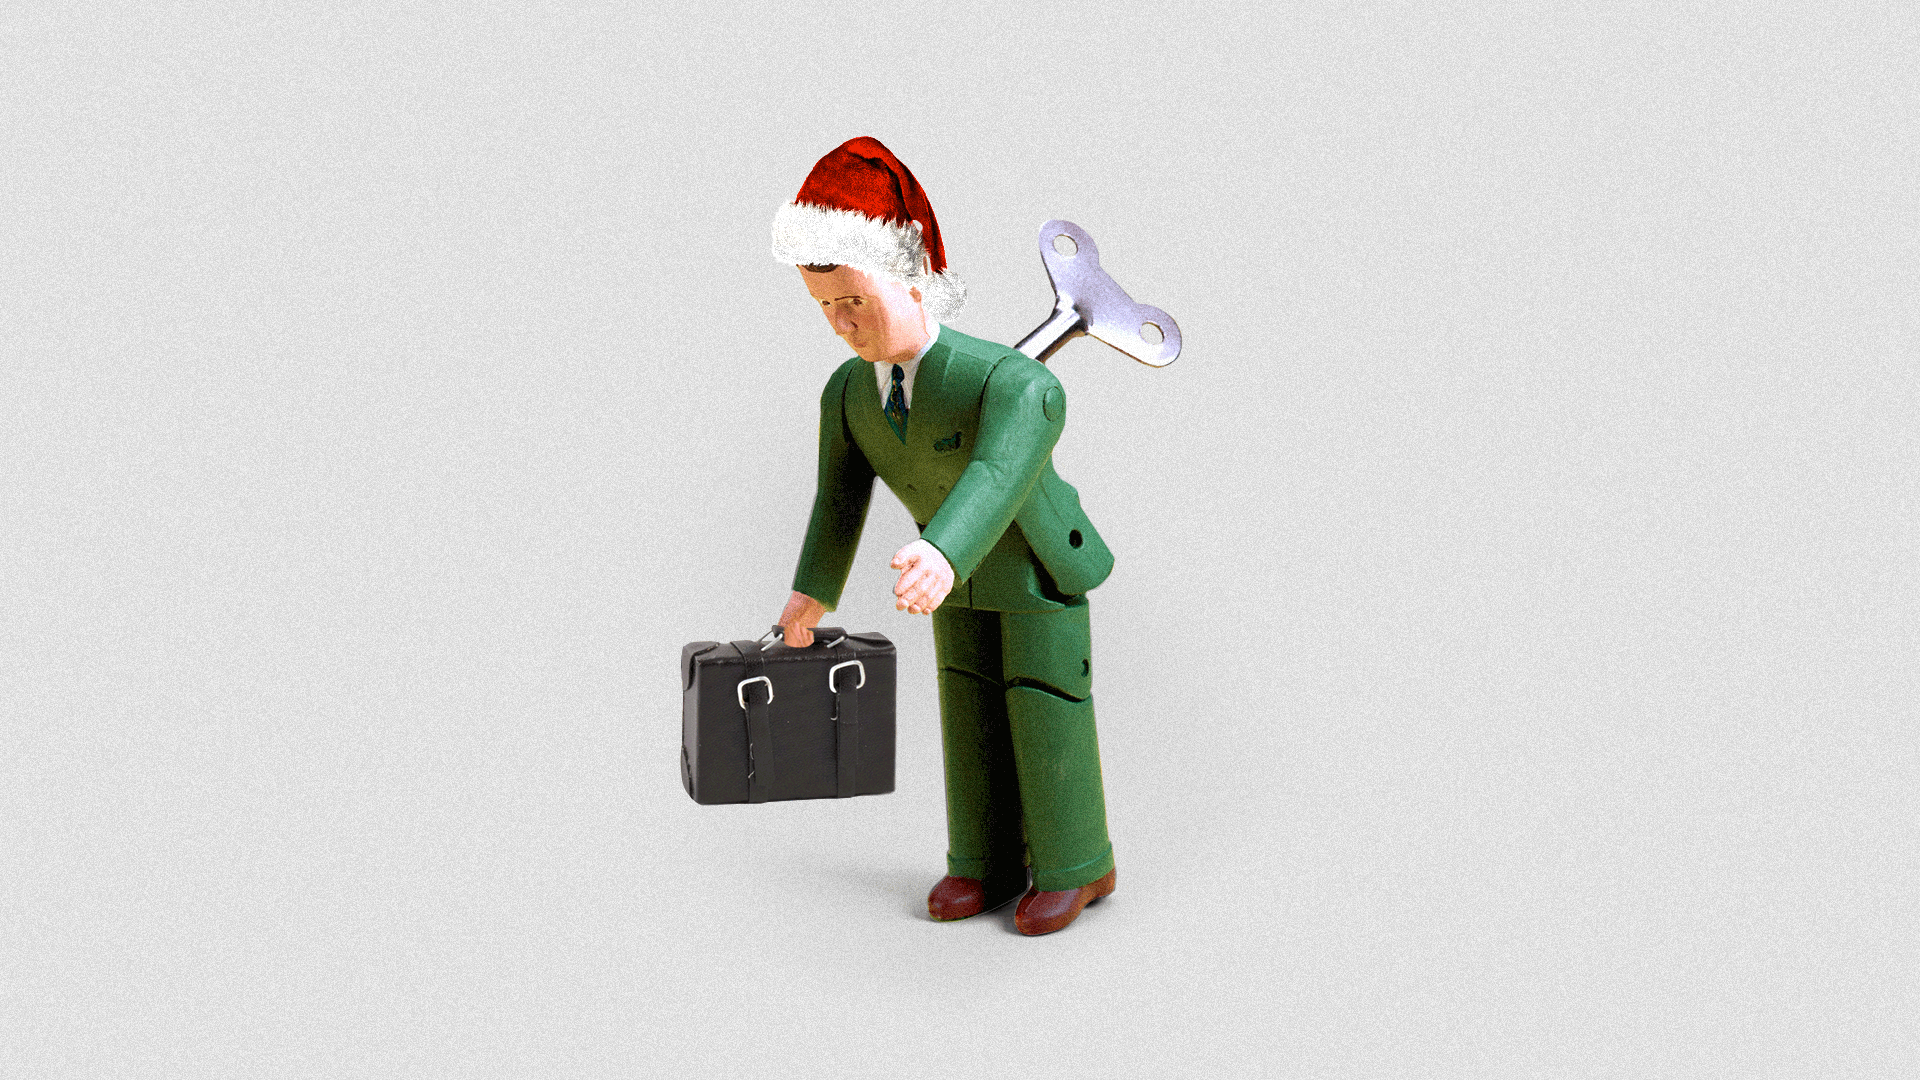 Animated illustration of a toy businessman with a briefcase and Santa hat being wound up as if ready to march forward.